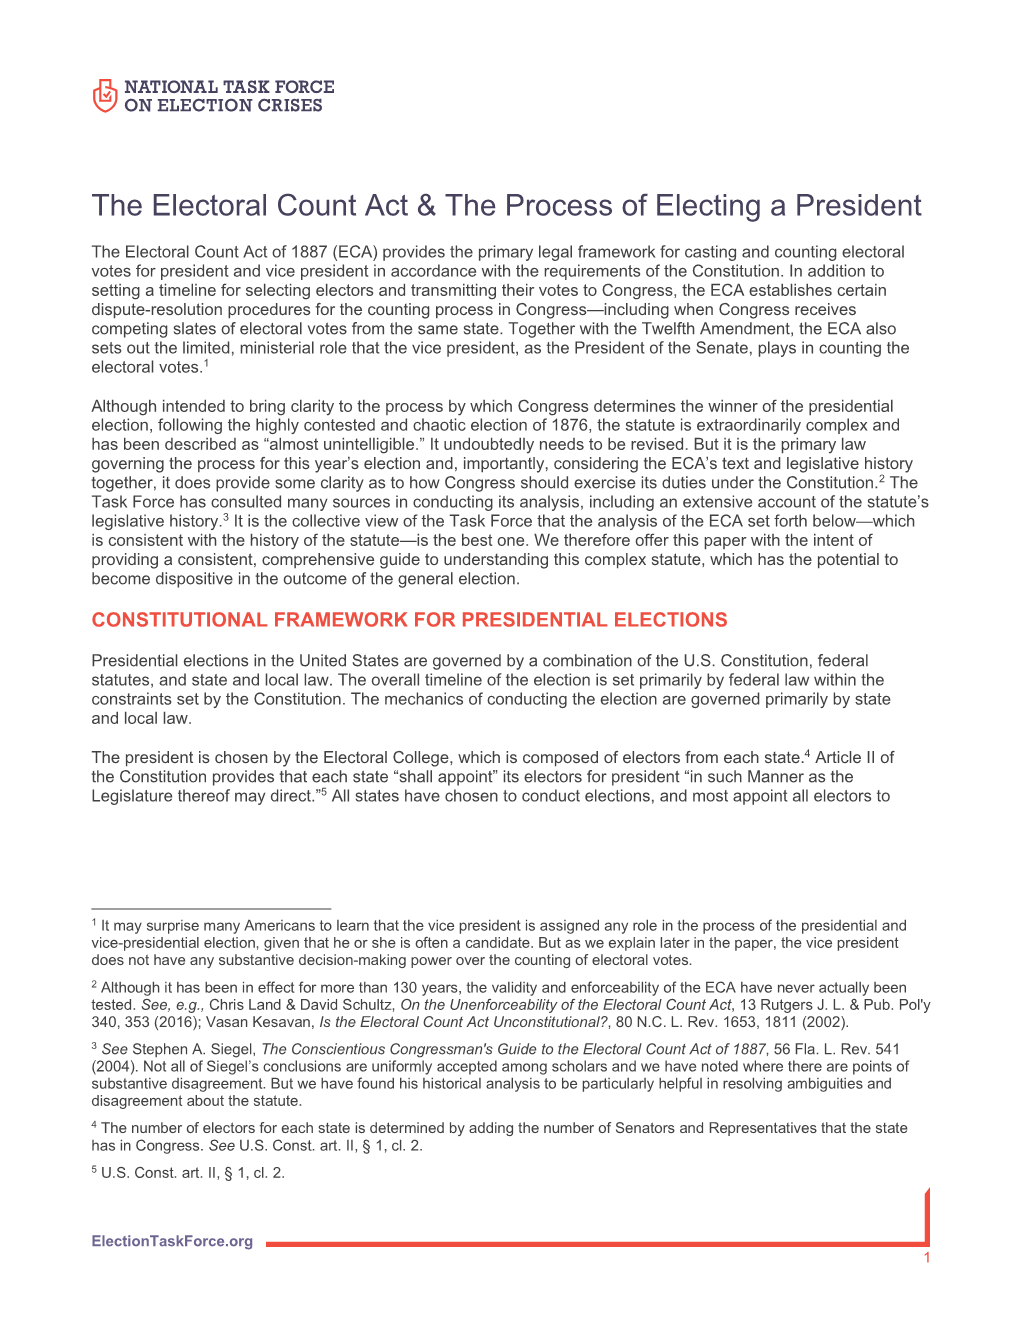 The Electoral Count Act & the Process of Electing a President